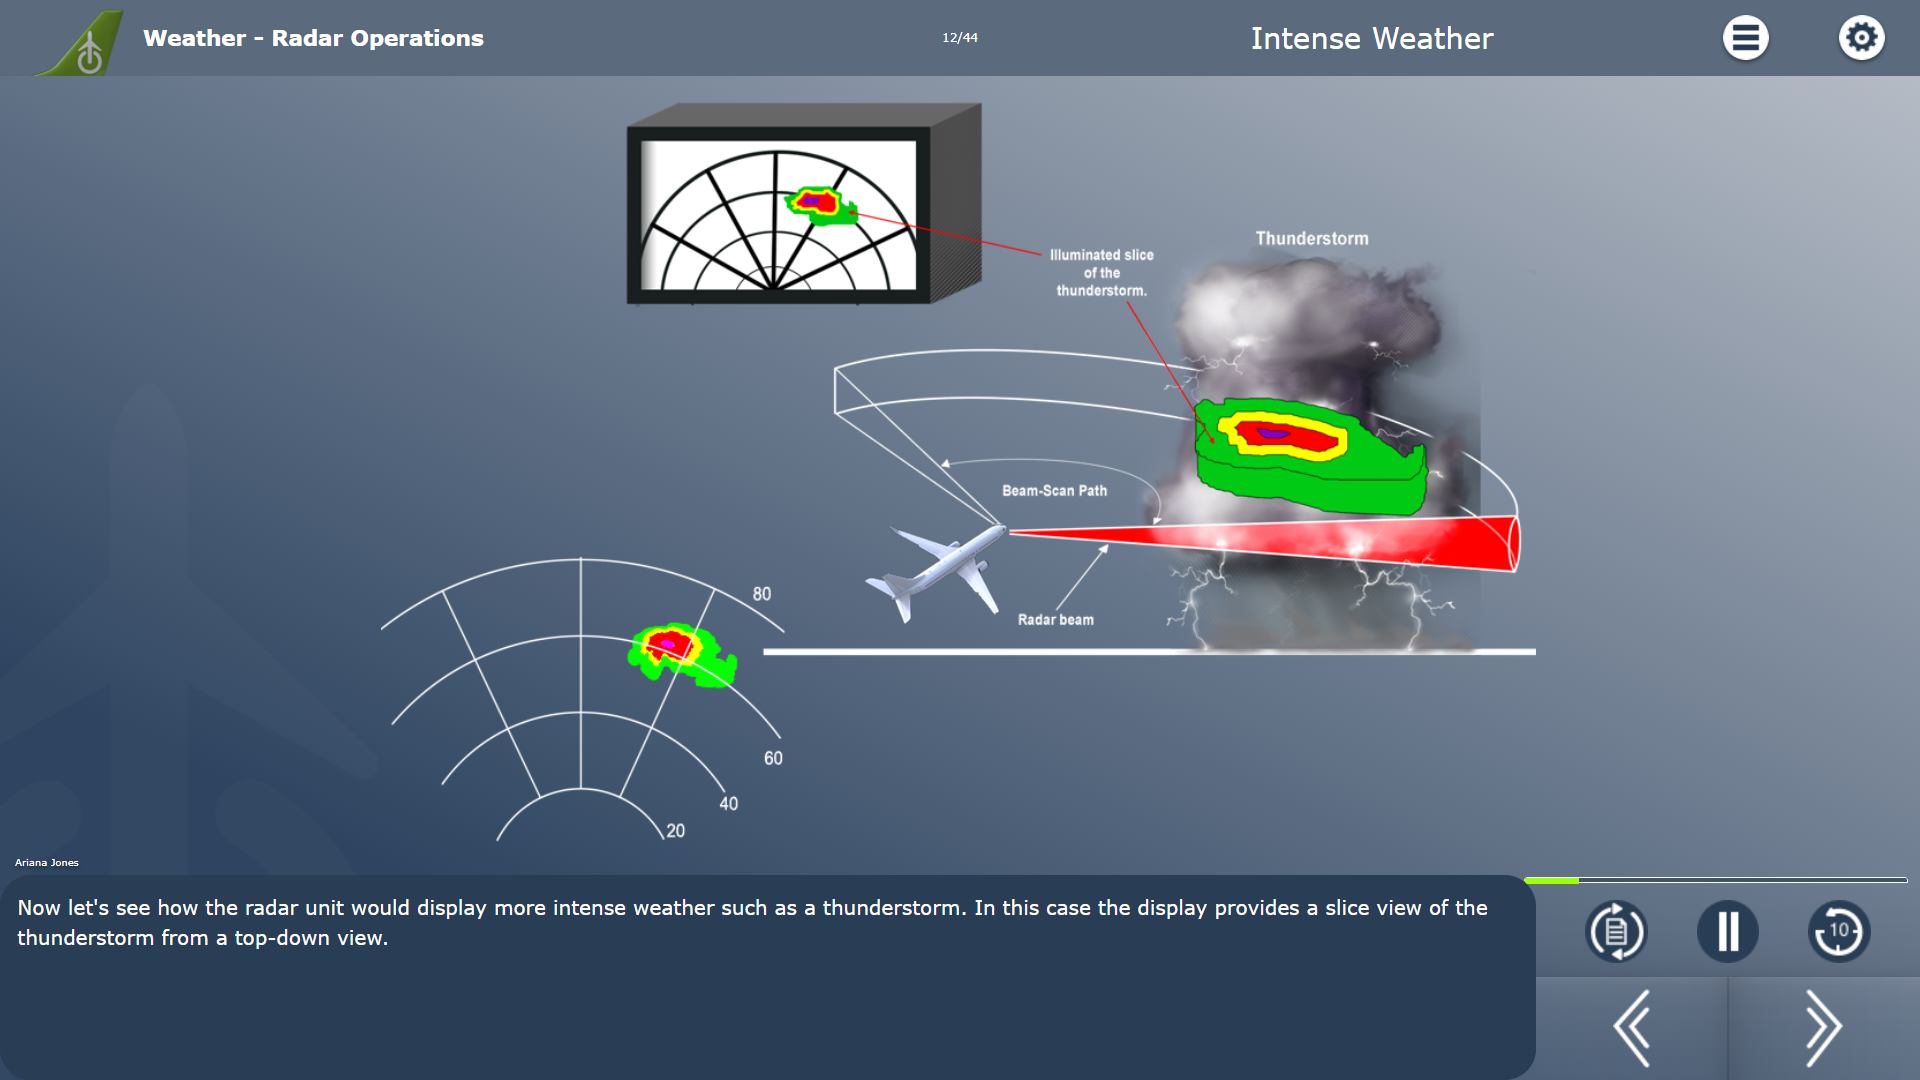 Weather Radar - Intense Weather Course Example